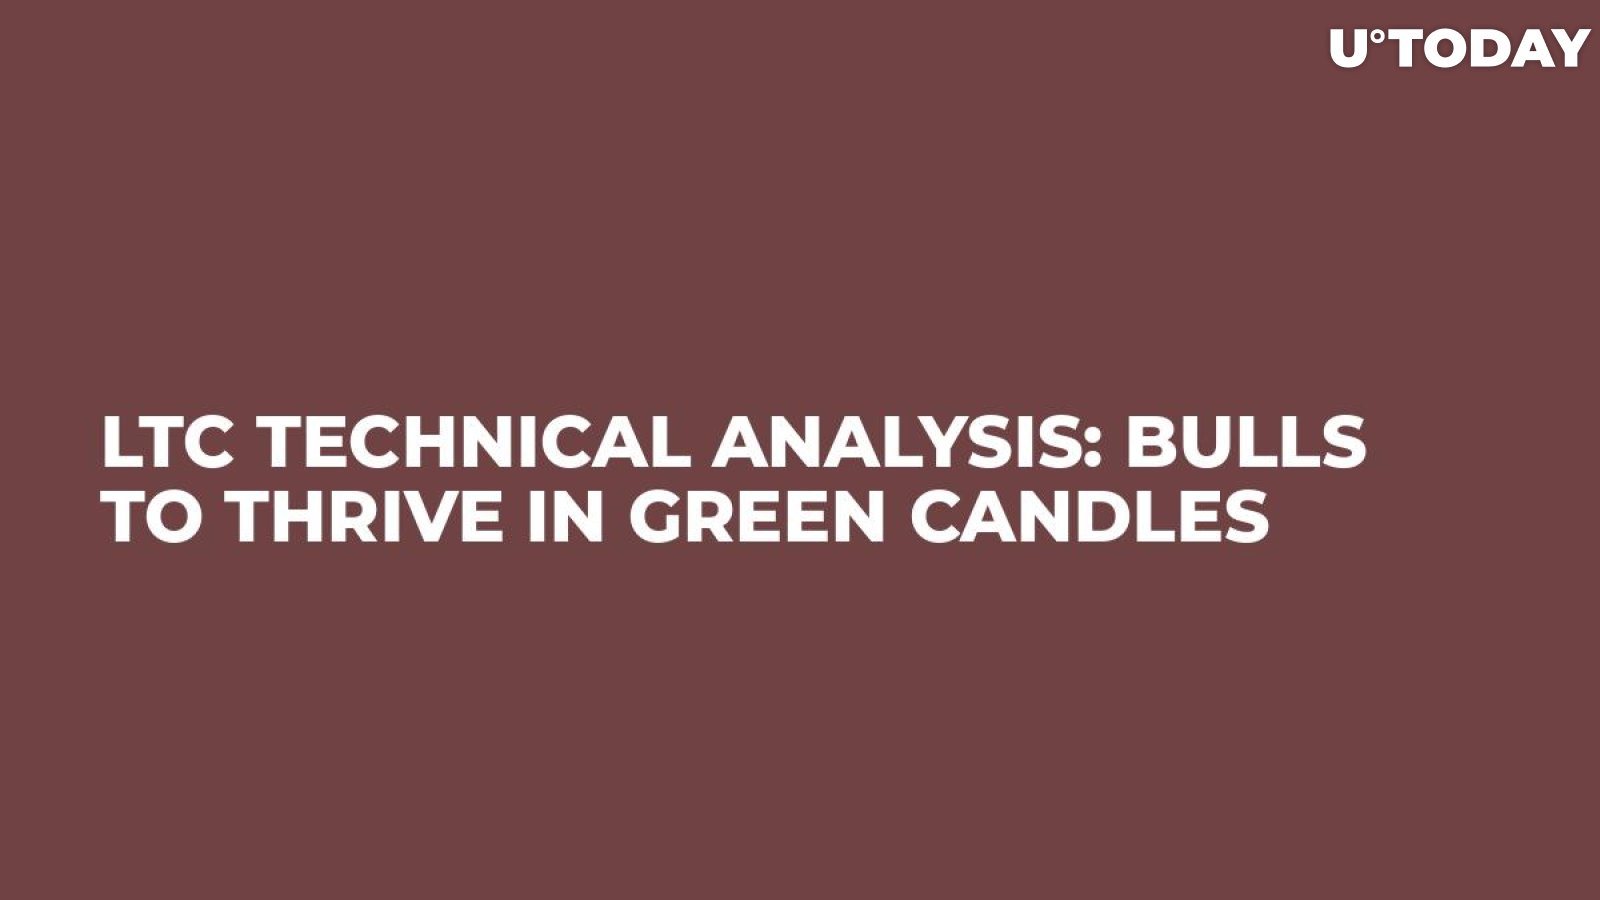 LTC Technical Analysis: Bulls to Thrive in Green Candles